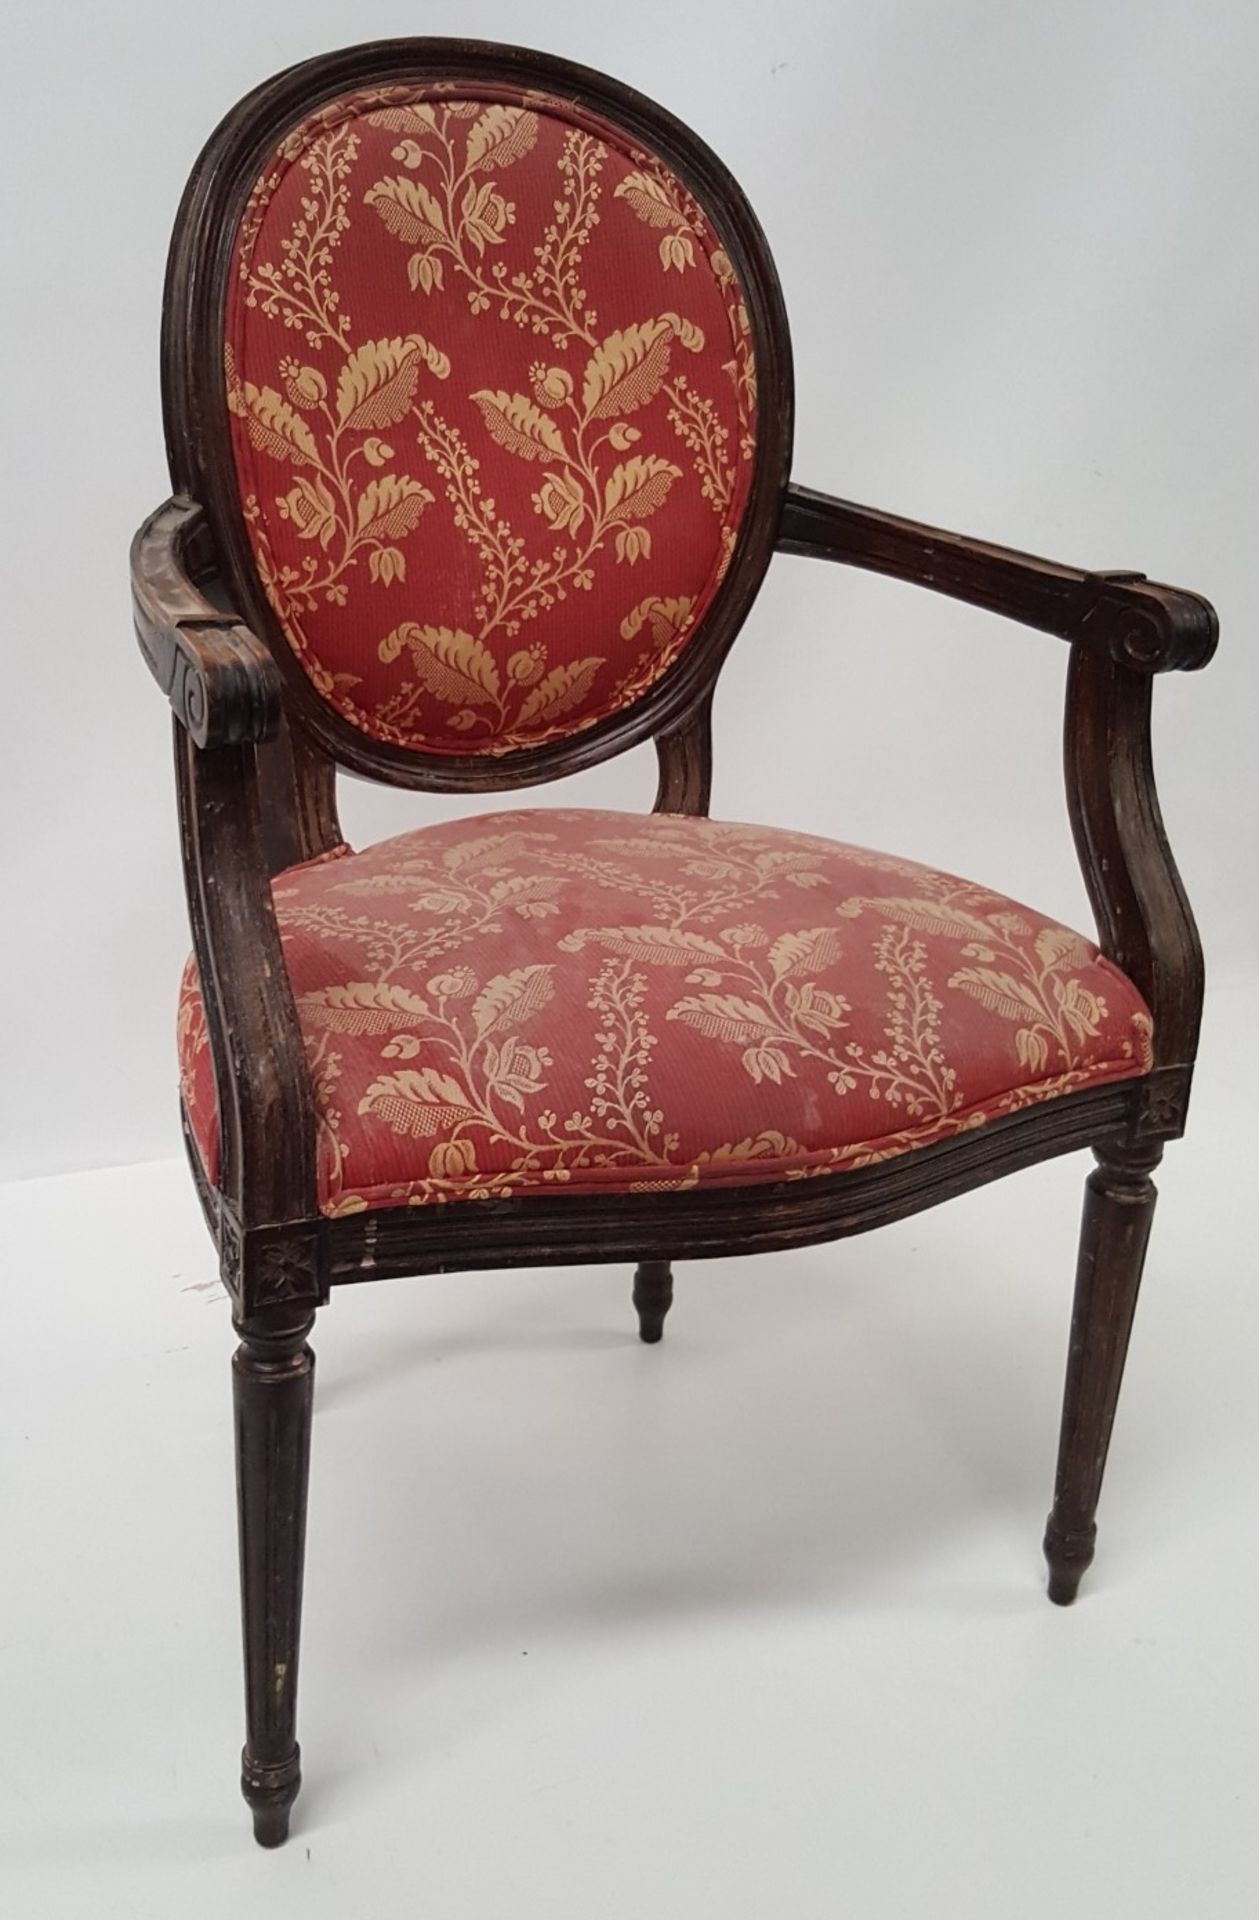 6 x Antique Style Wooden Chairs Upholstered In Red Fabric With Gold Leaf Design - CL431 - Image 6 of 8